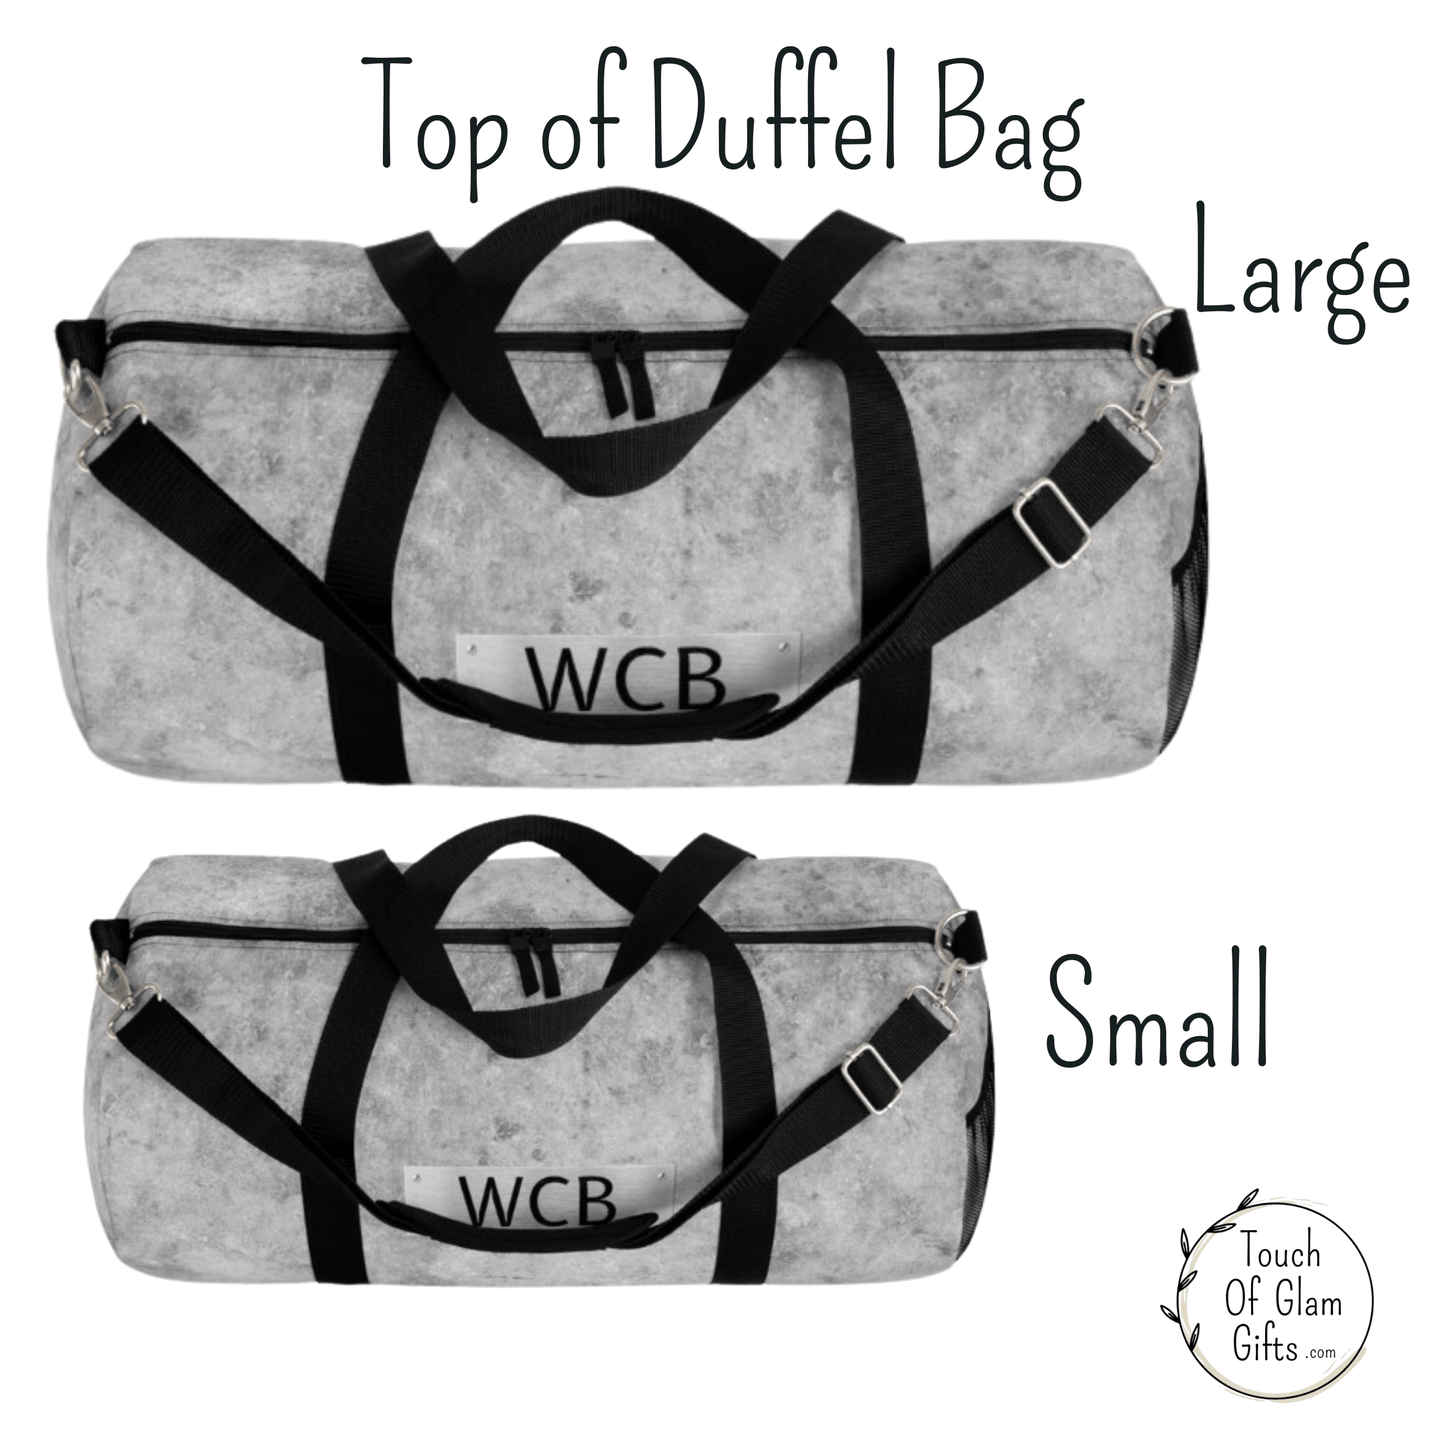 The top of the light grey weekender bag has a quality double handle zipper.